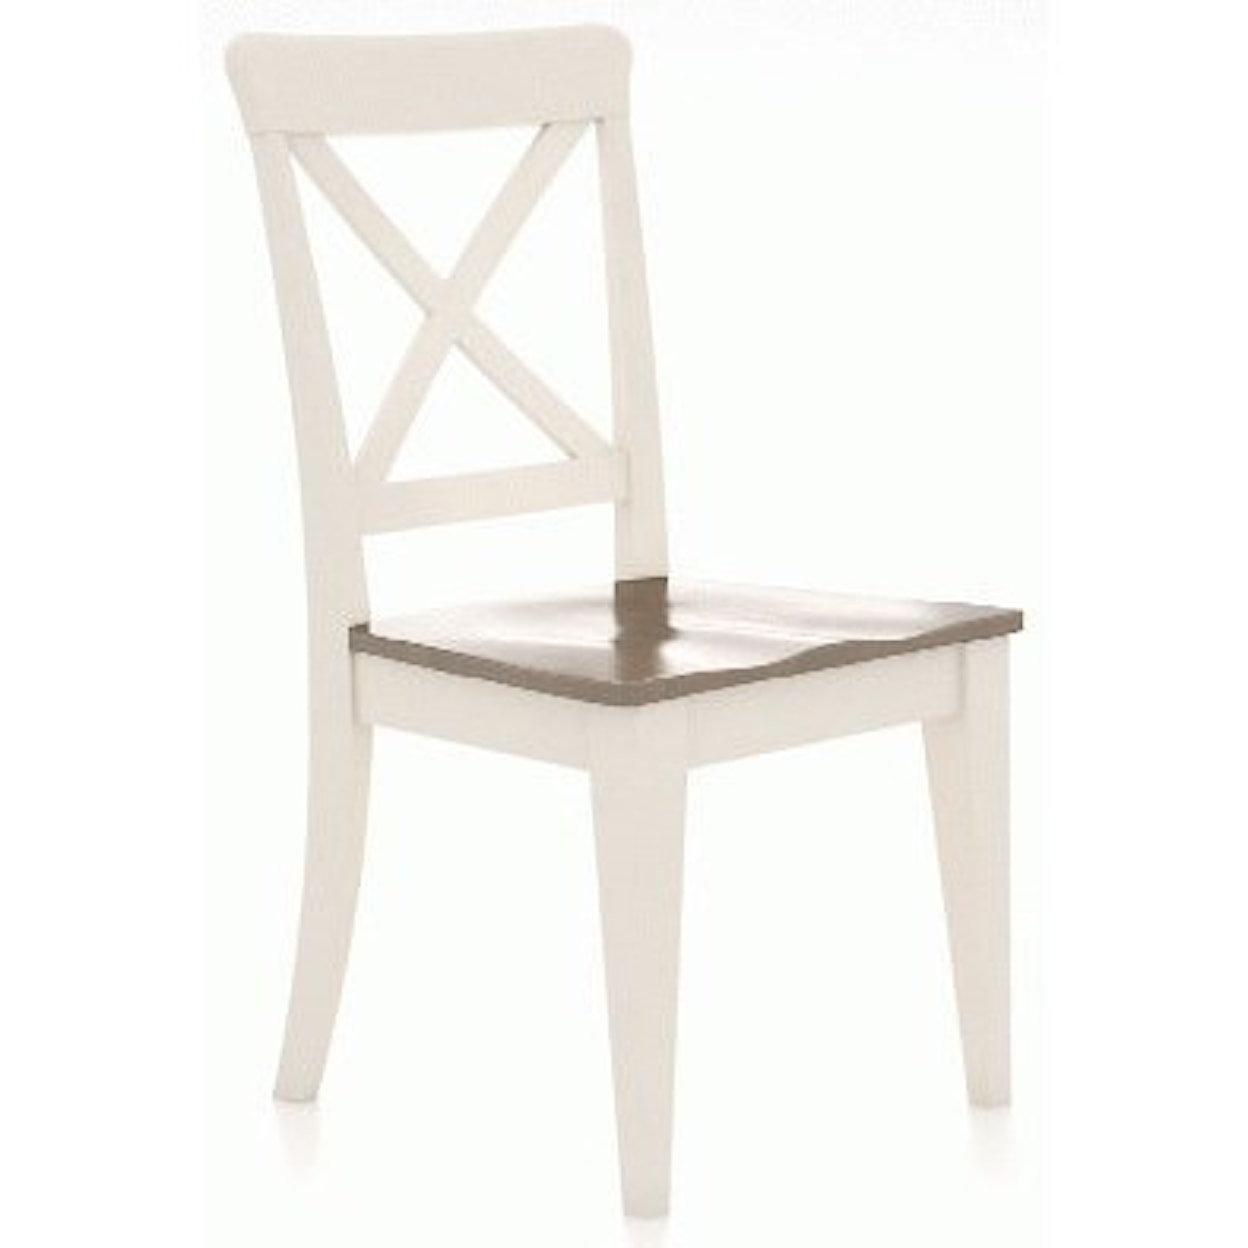 Canadel Gourmet. Customizable Petite X-Back Side Chair